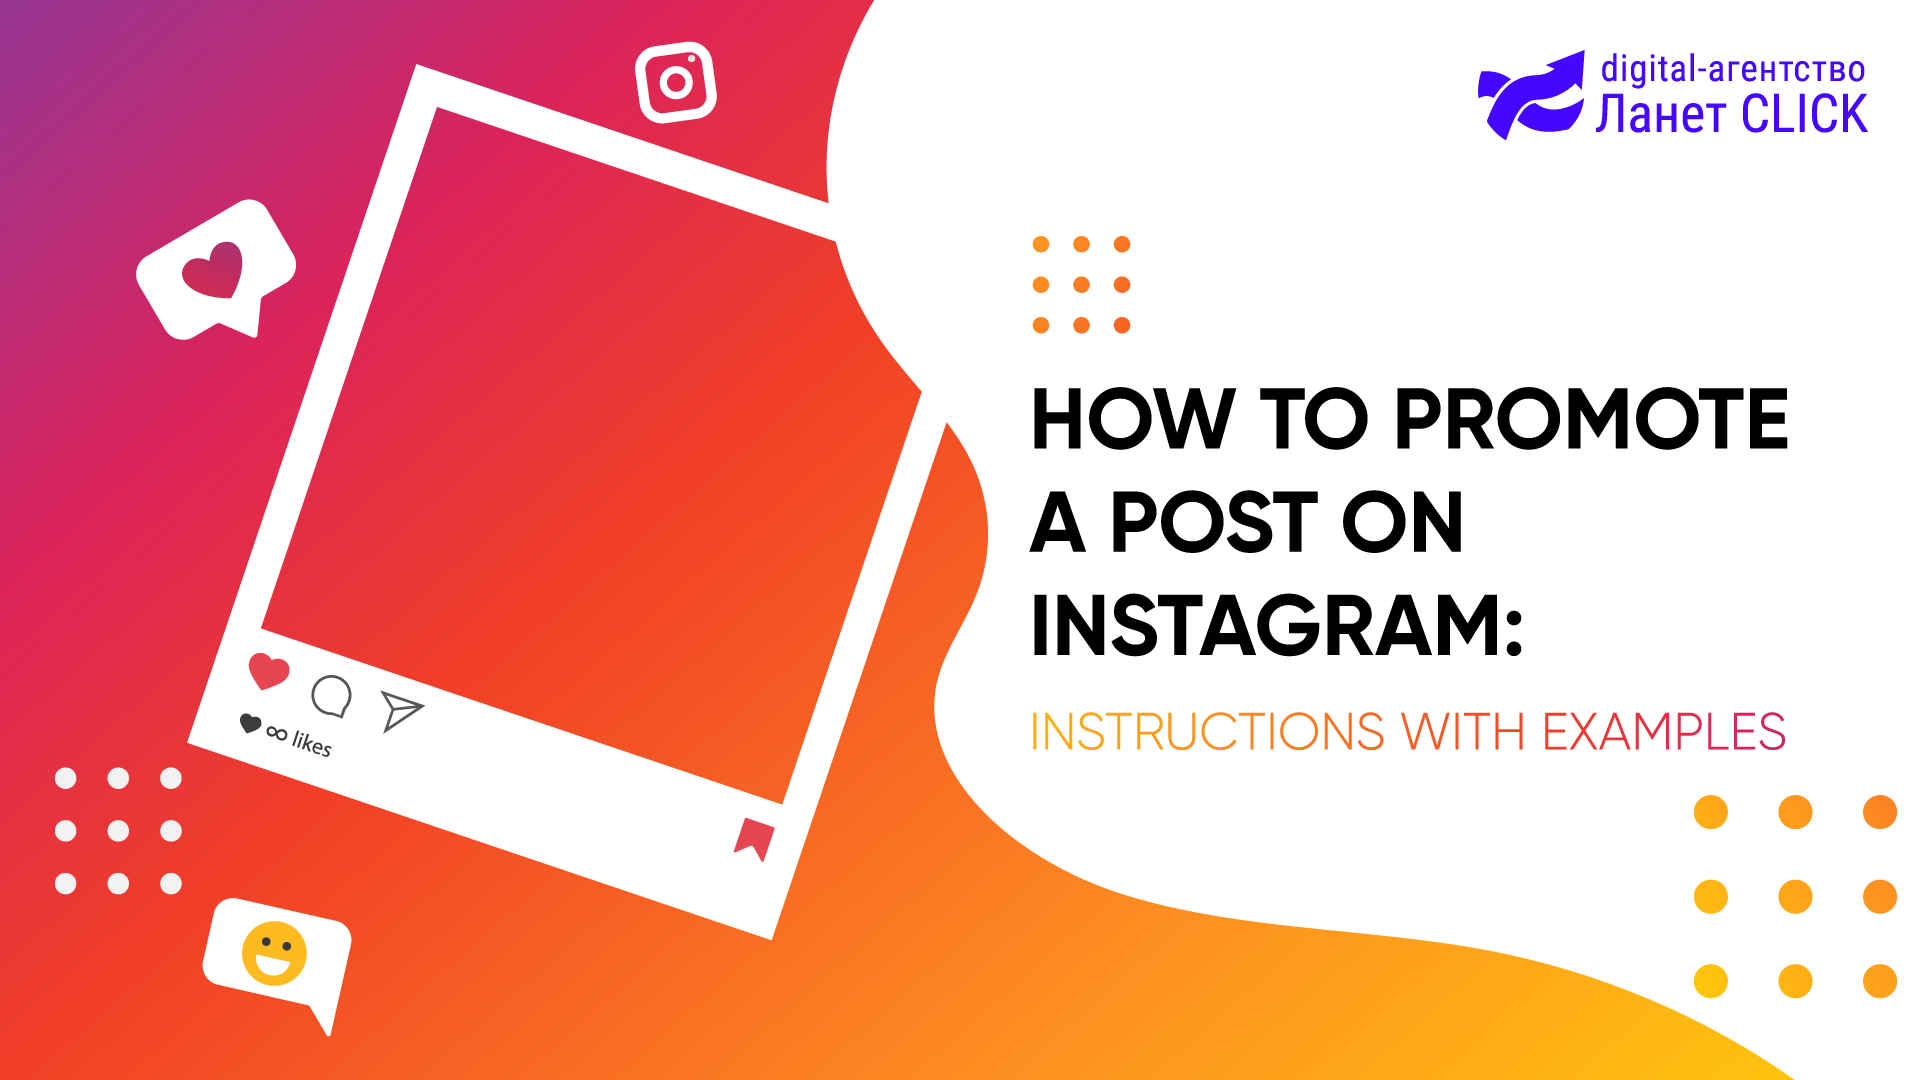 How to promote a post on Instagram: an instruction with examples